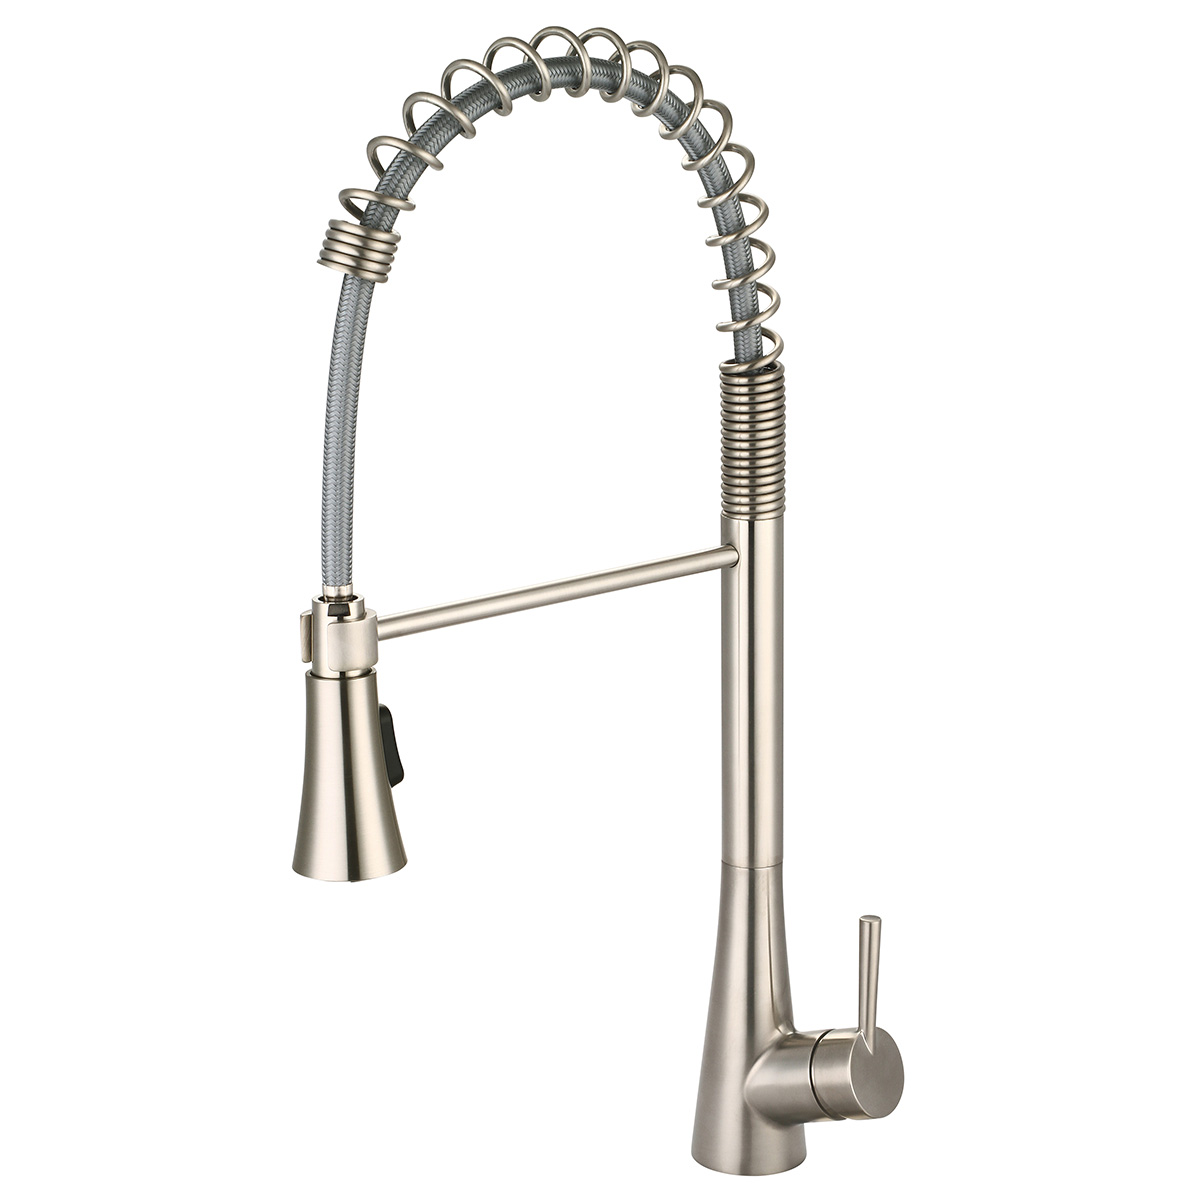 I2 K-5010-bn 7.62 In. Single Handle Pre-rinse Spring Pull-down Kitchen Faucet - Brushed Nickel